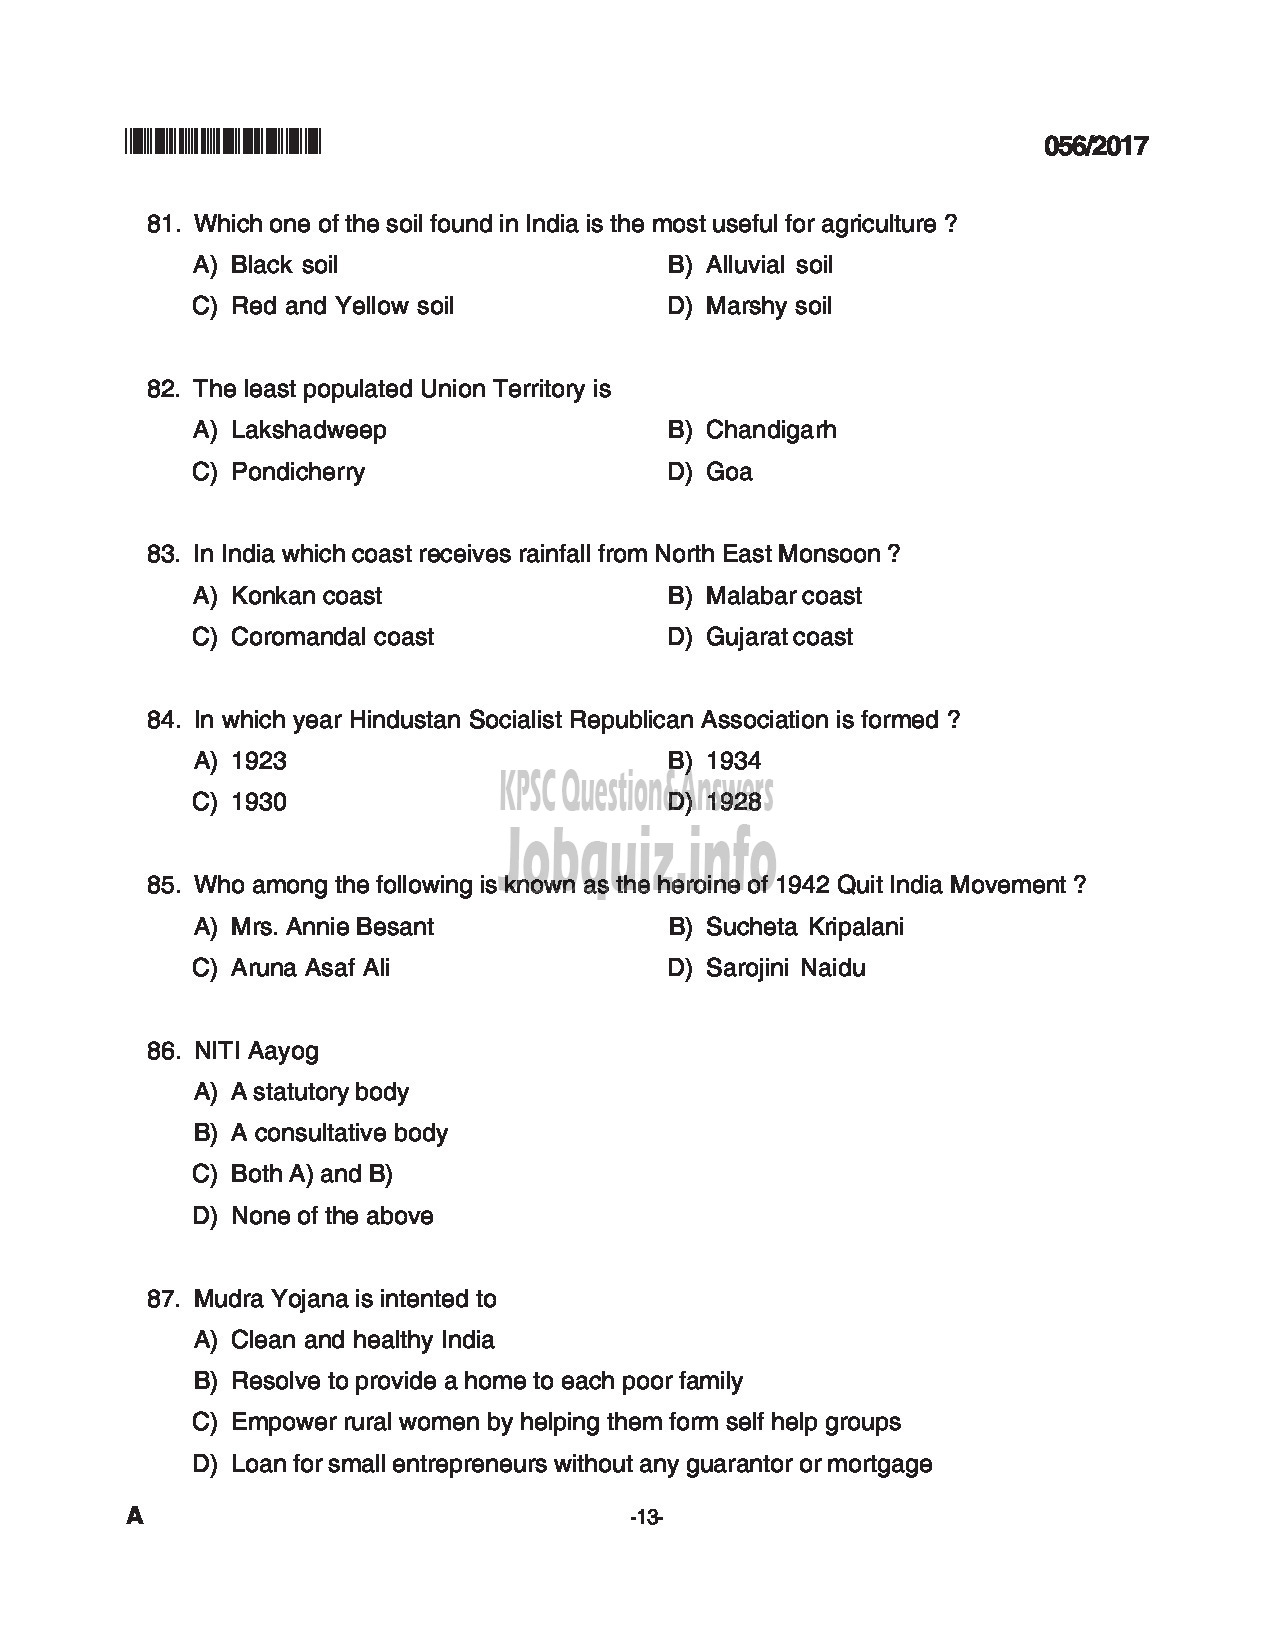 Kerala PSC Question Paper - PHARMACIST GRADE II INSURANCE MEDICAL SERVICES QUESTION PAPER-13